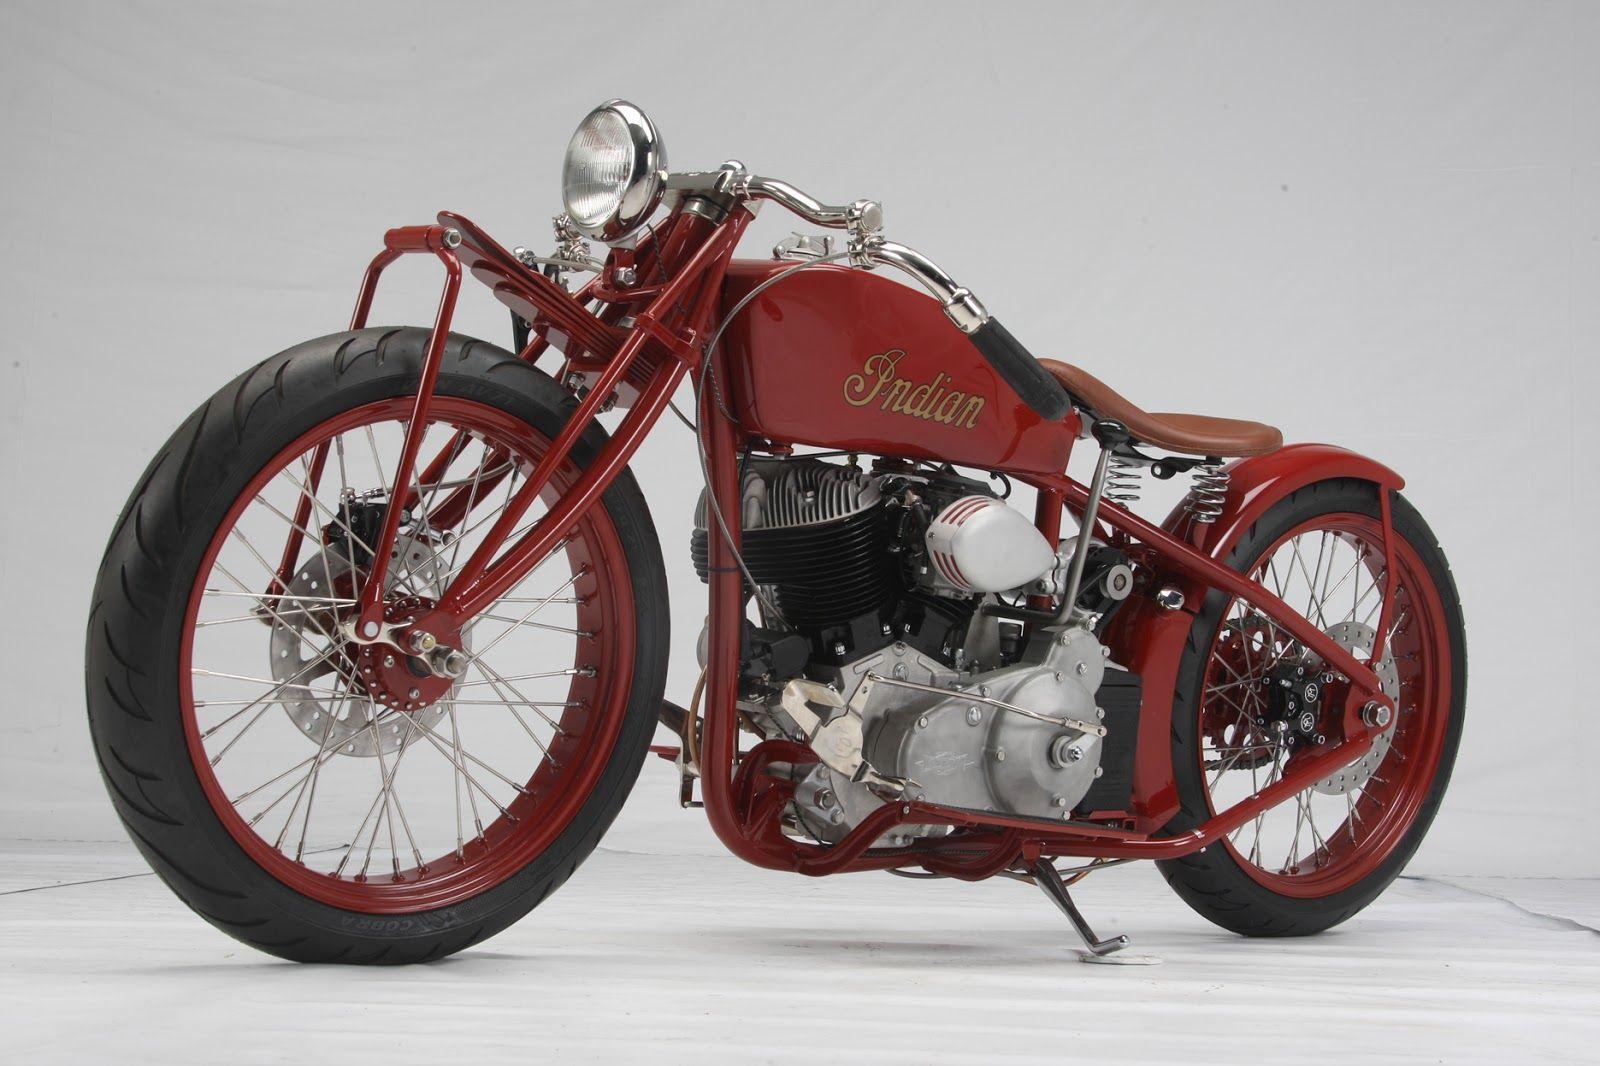 Indian Motorcycle Wallpaper. Indian Motorcycle Background